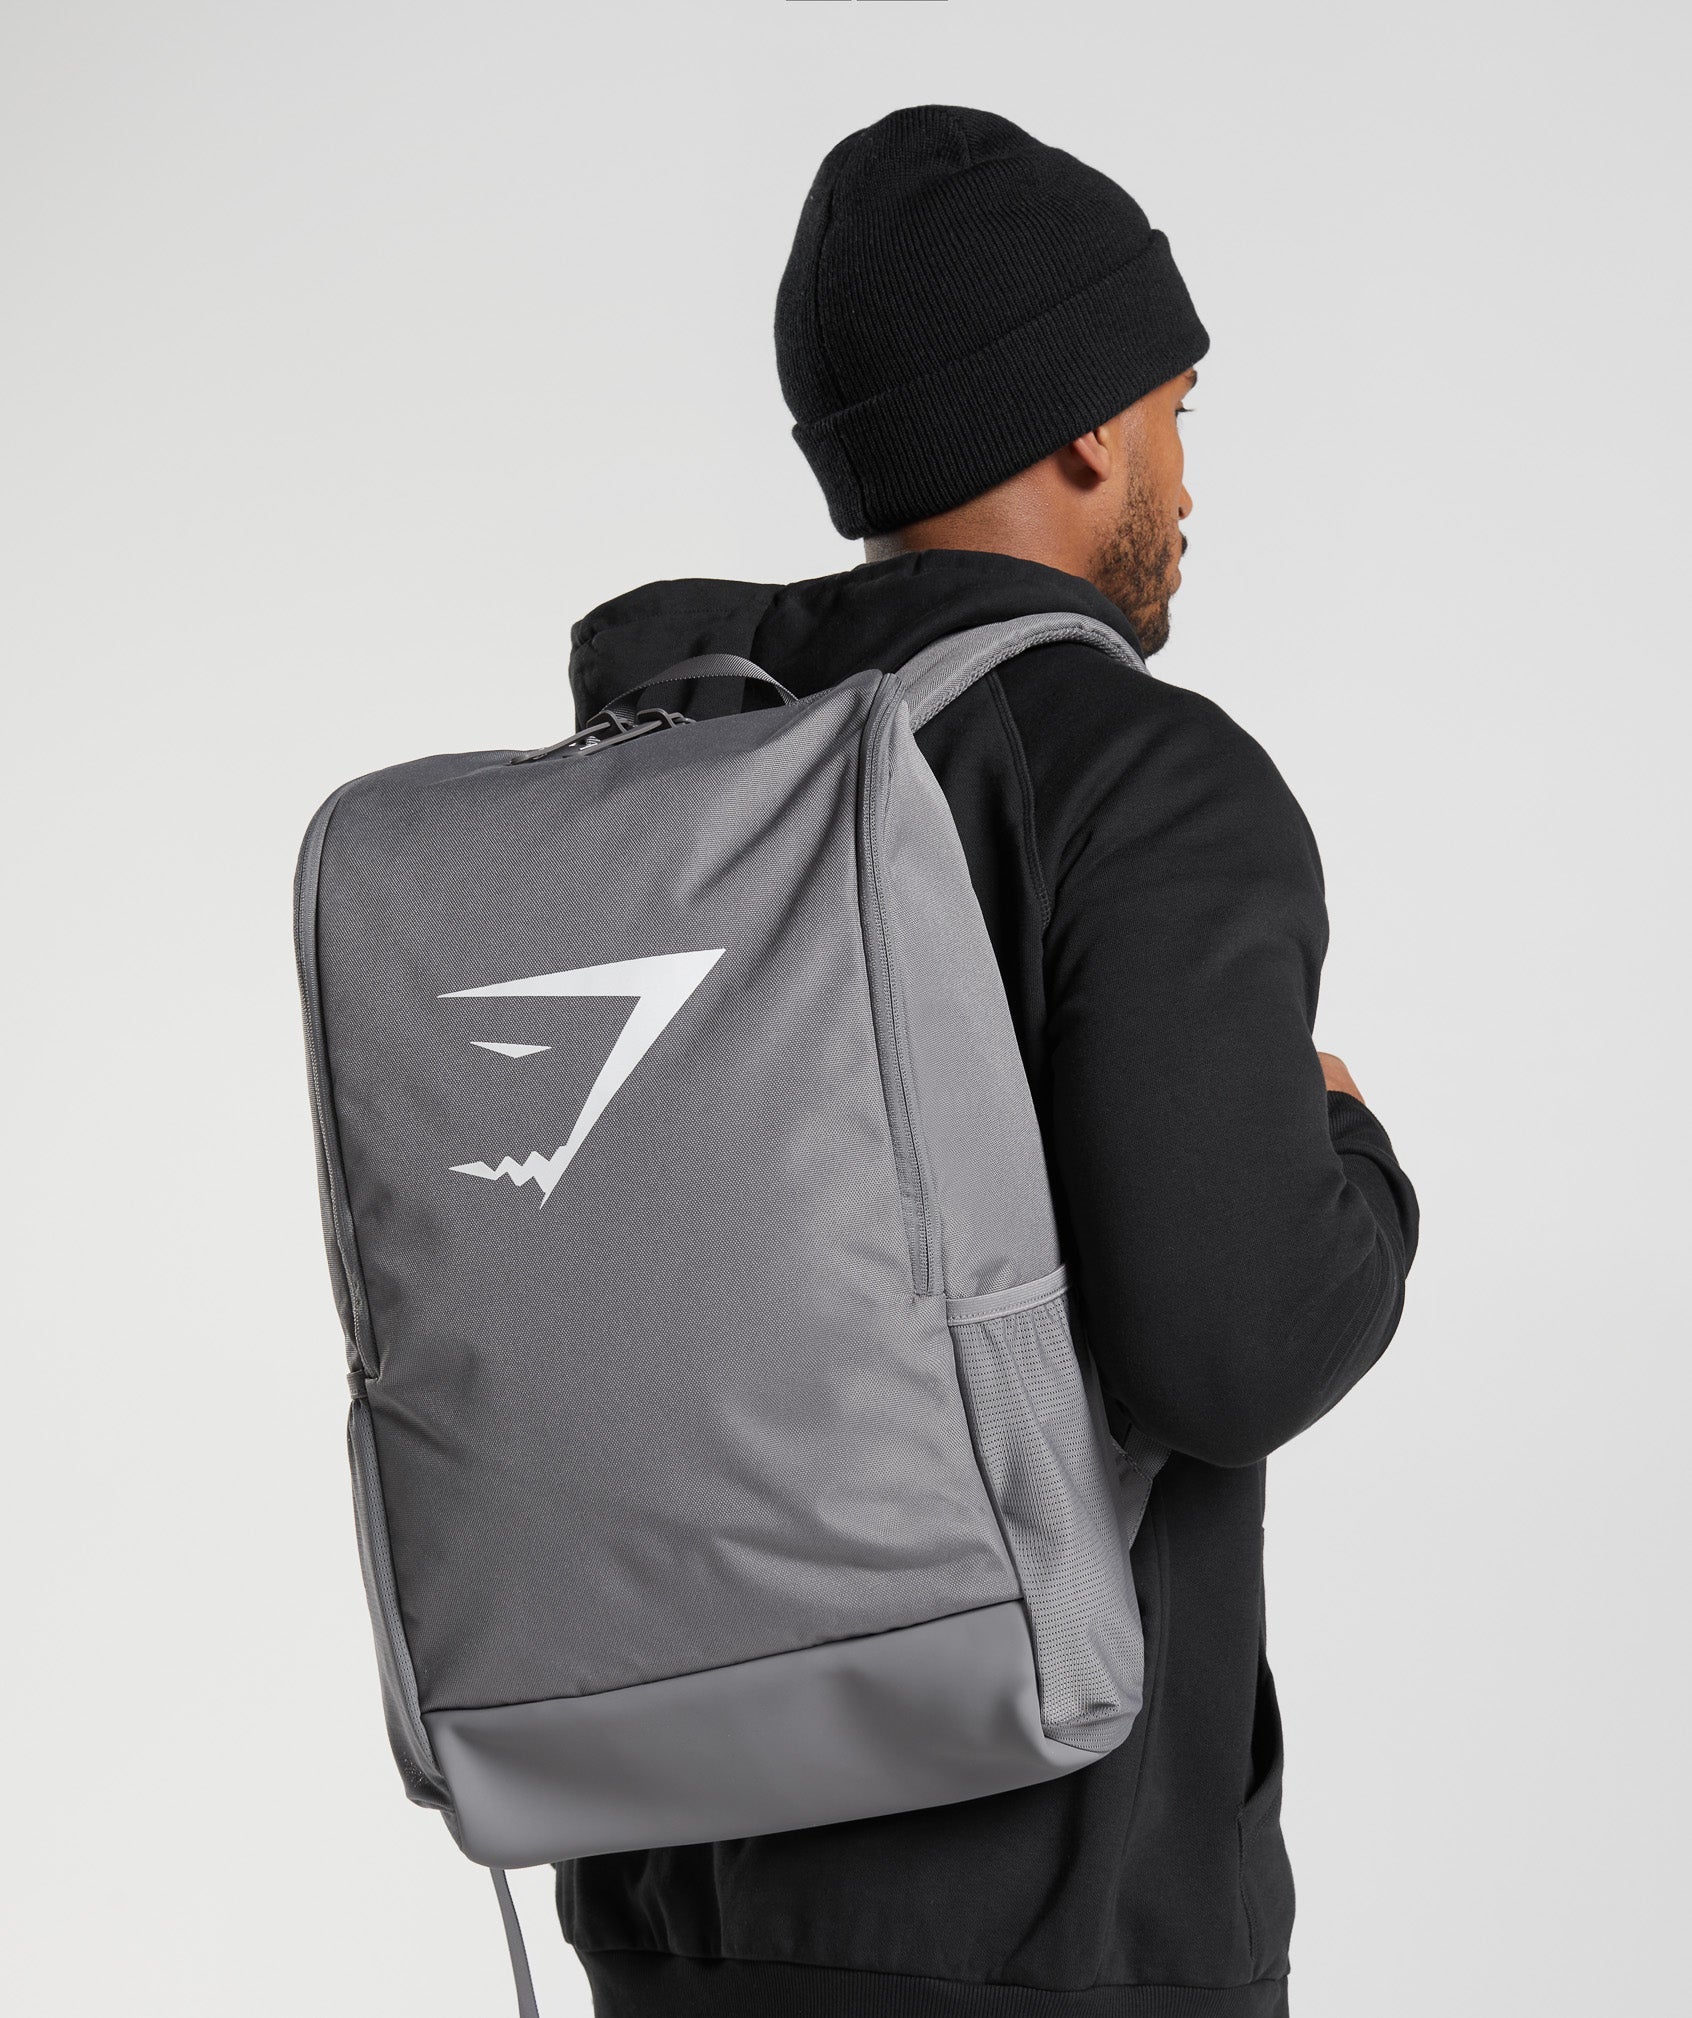 Sharkhead Backpack in Coin Grey - view 6